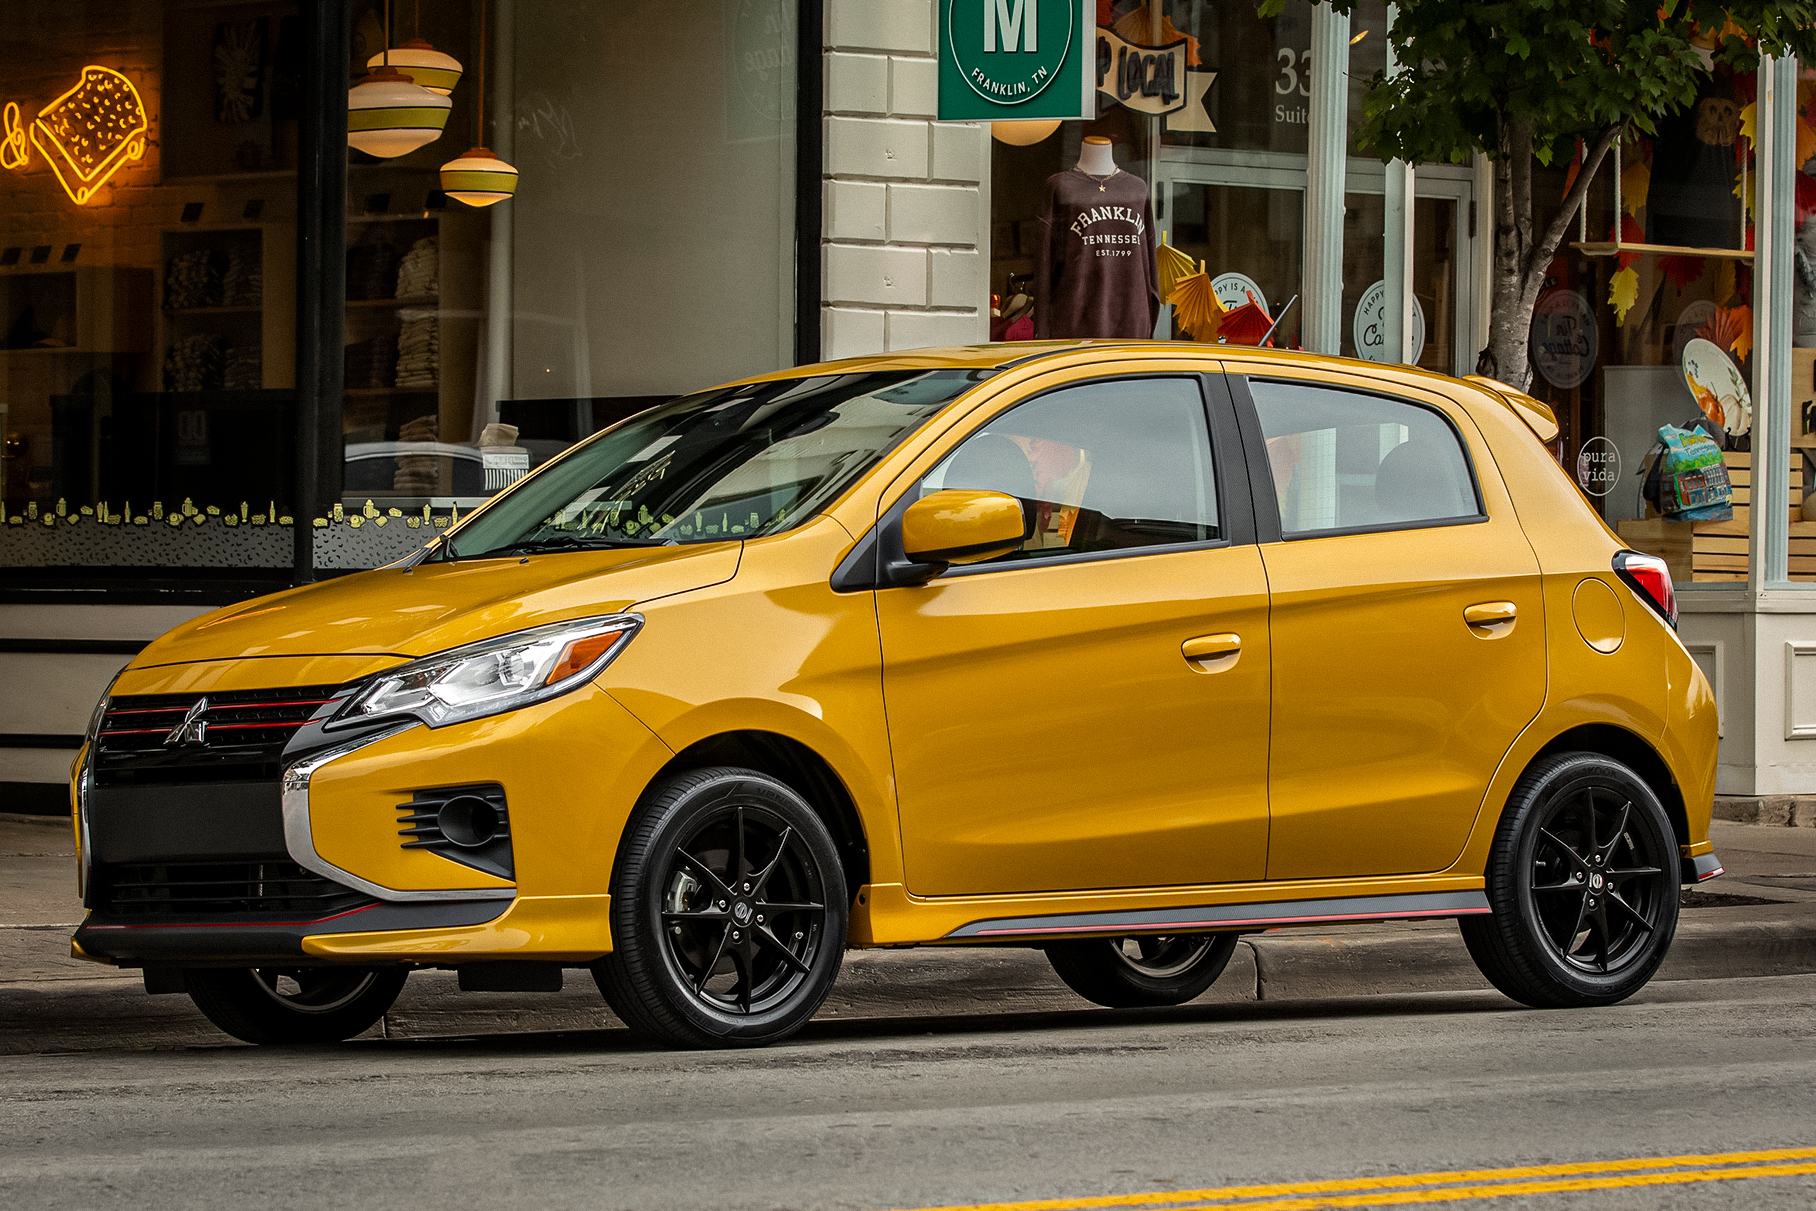 Cheap Mitsubishi Mirage to be retired in the US